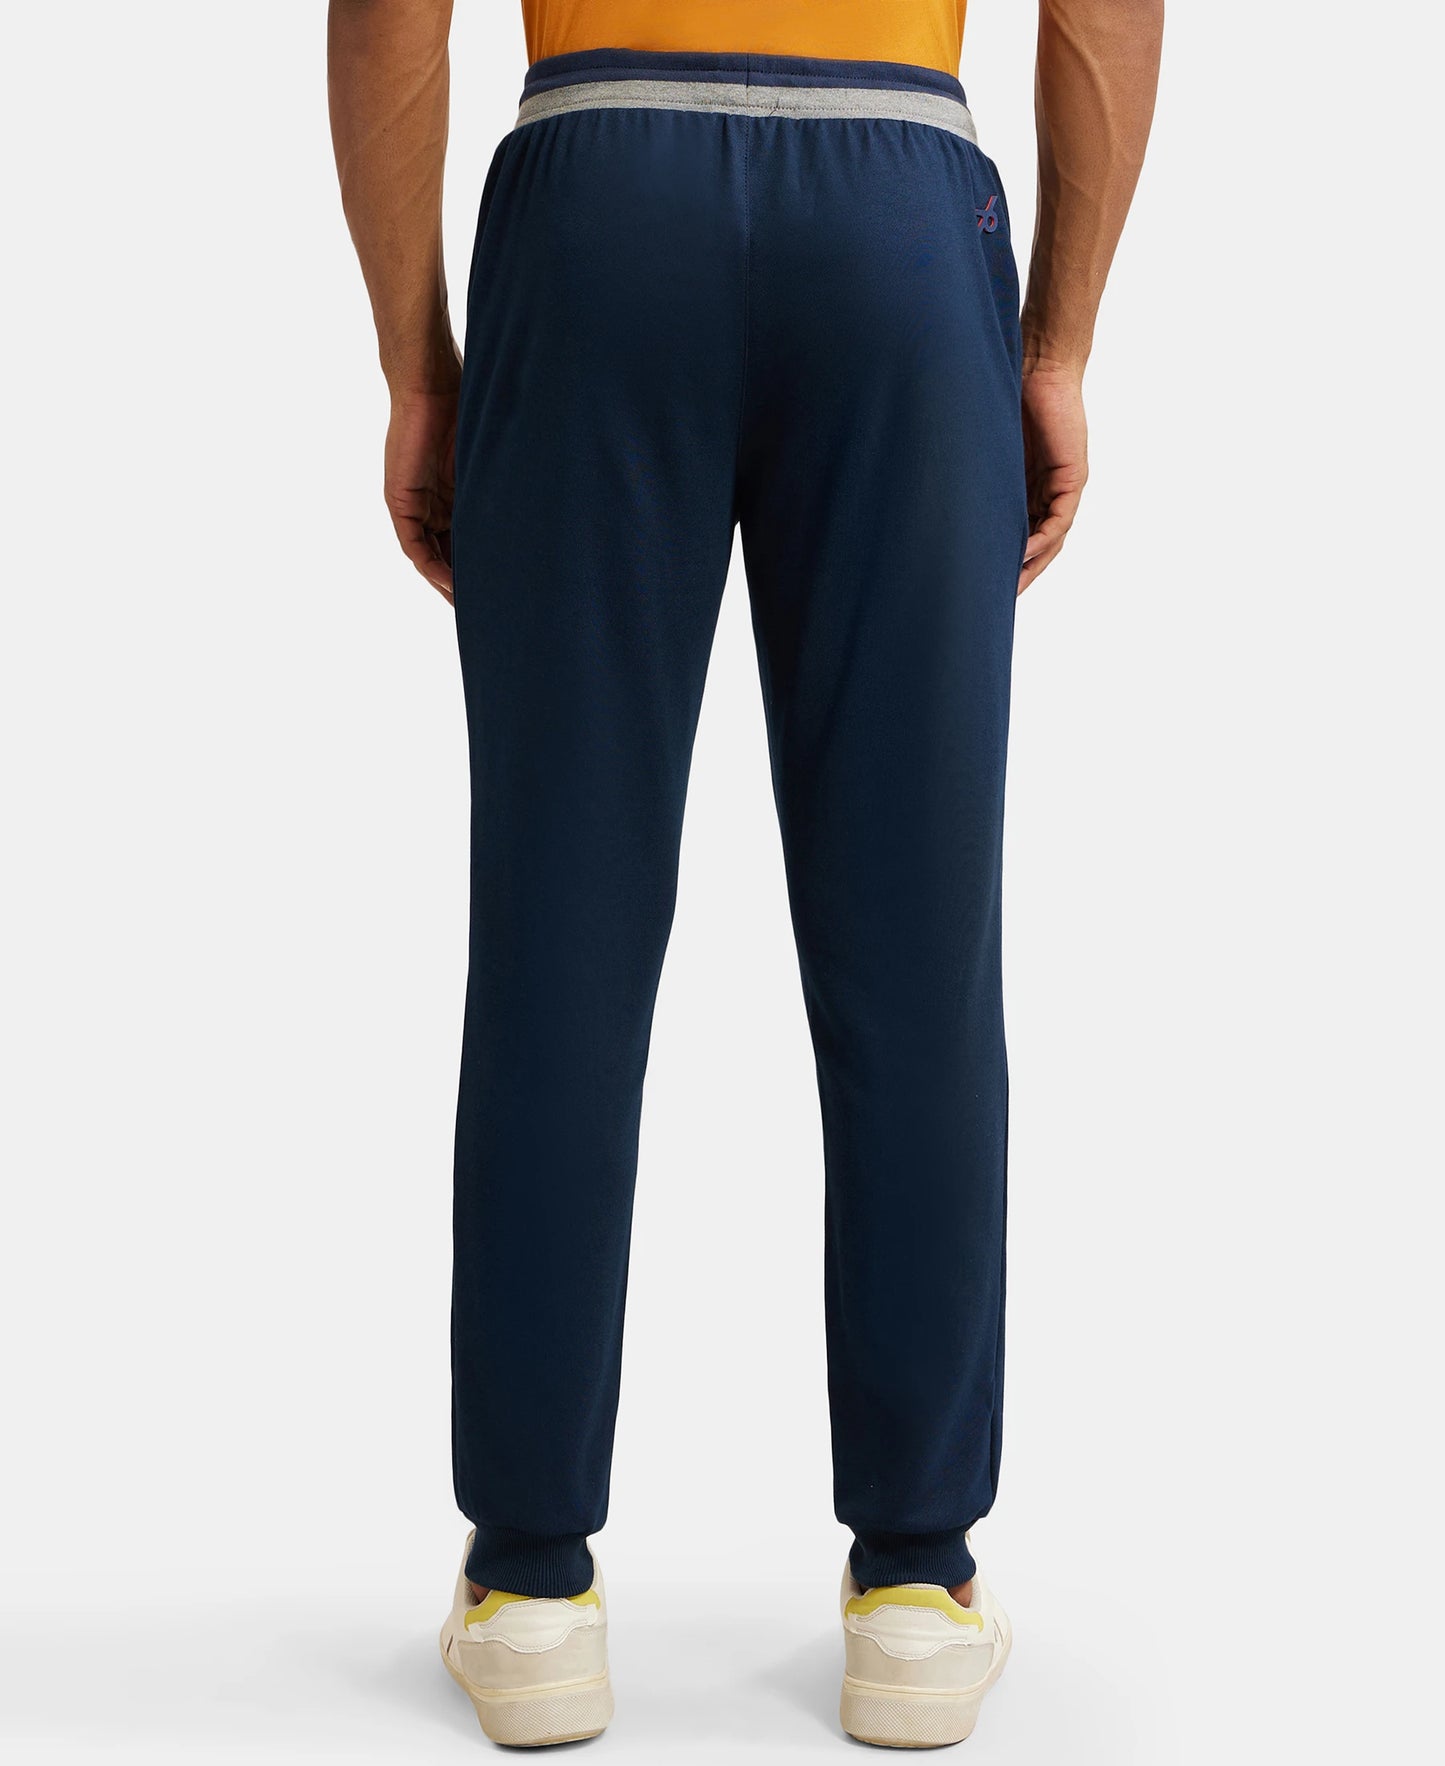 Super Combed Cotton Rich Pique Slim Fit Jogger with Zipper Pockets - Navy-3